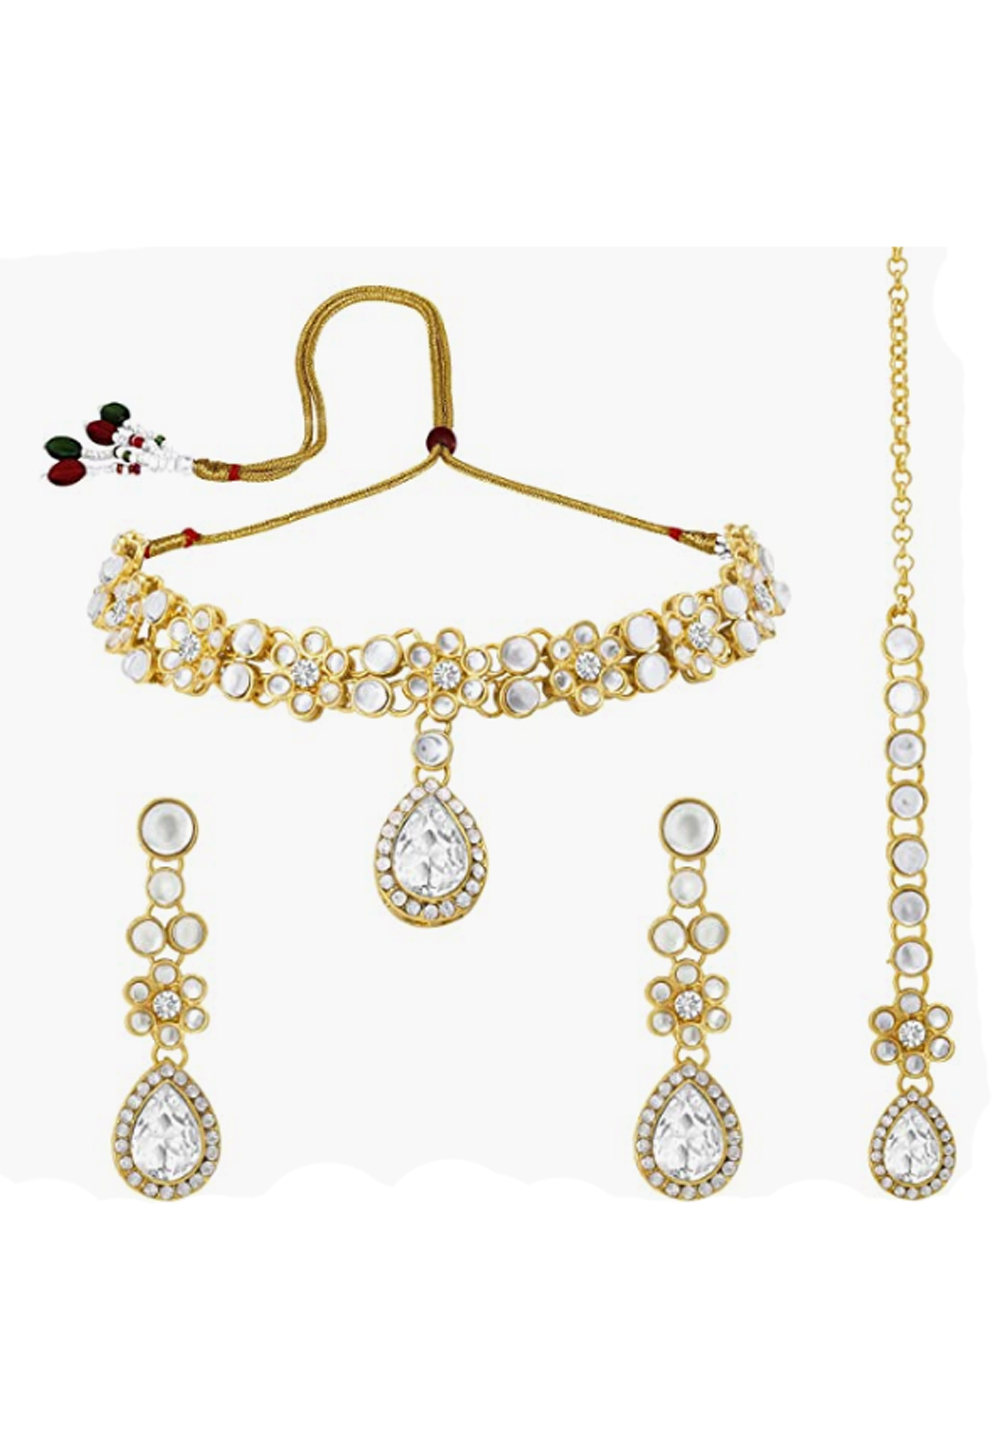 Off White Alloy Austrian Diamonds And Kundan Necklace Set With Earrings and Maang Tikka 260968